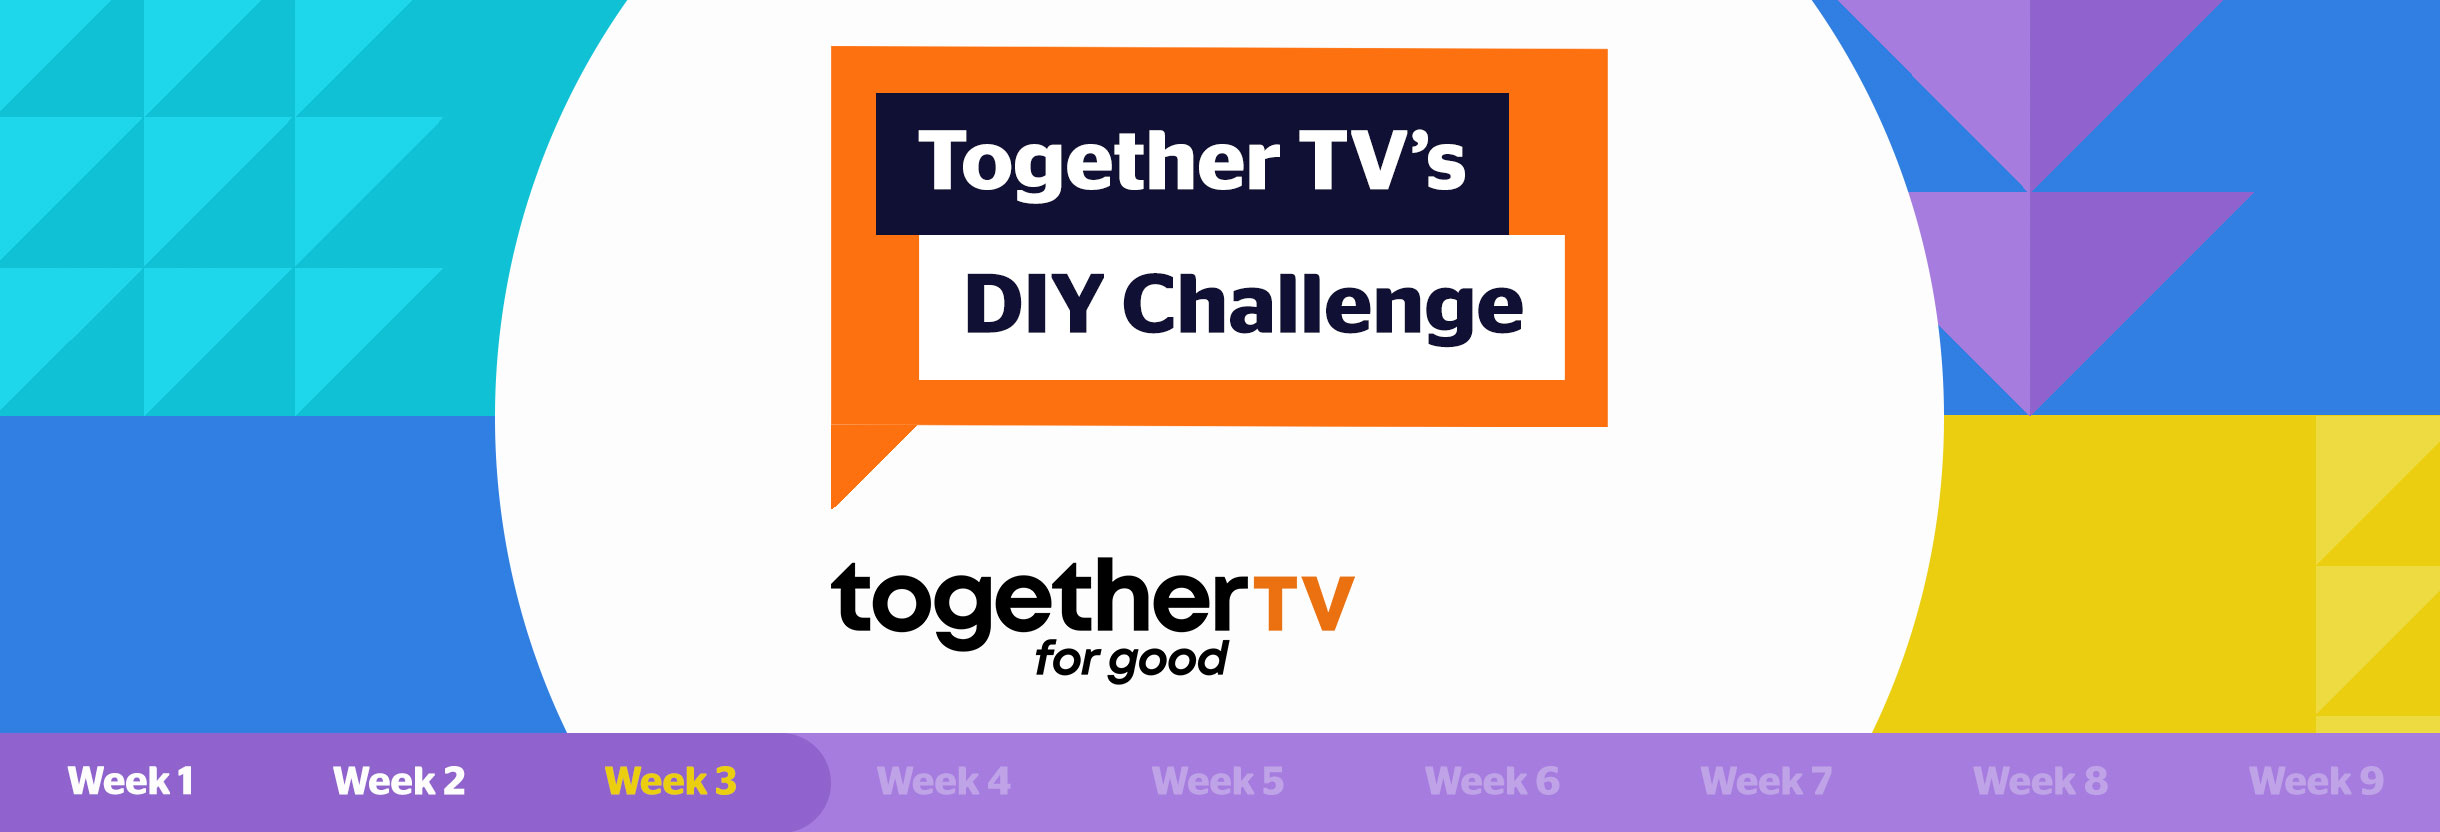 Welcome to week 3 of the DIY Challenge